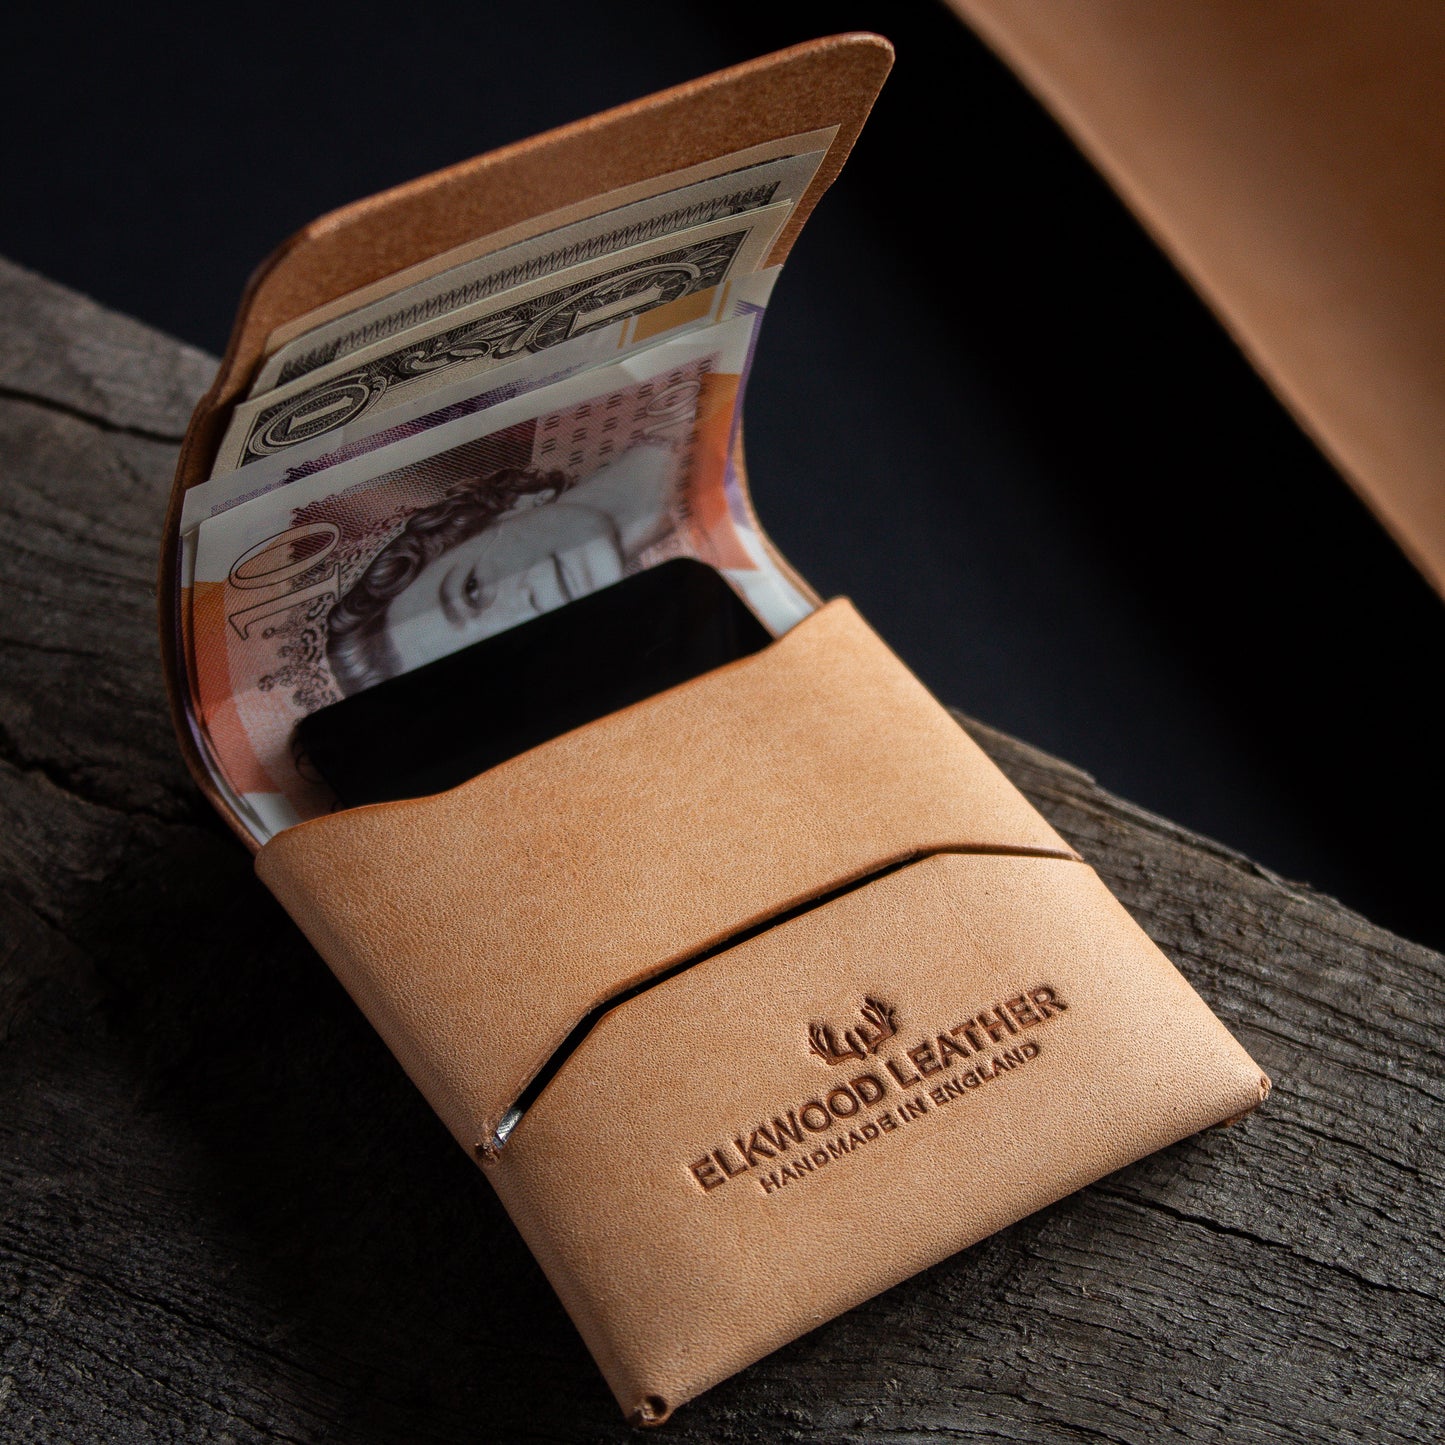 Everyday carry stitches wallet in natural vegetable tanned leather - open with unfolded cash and cards